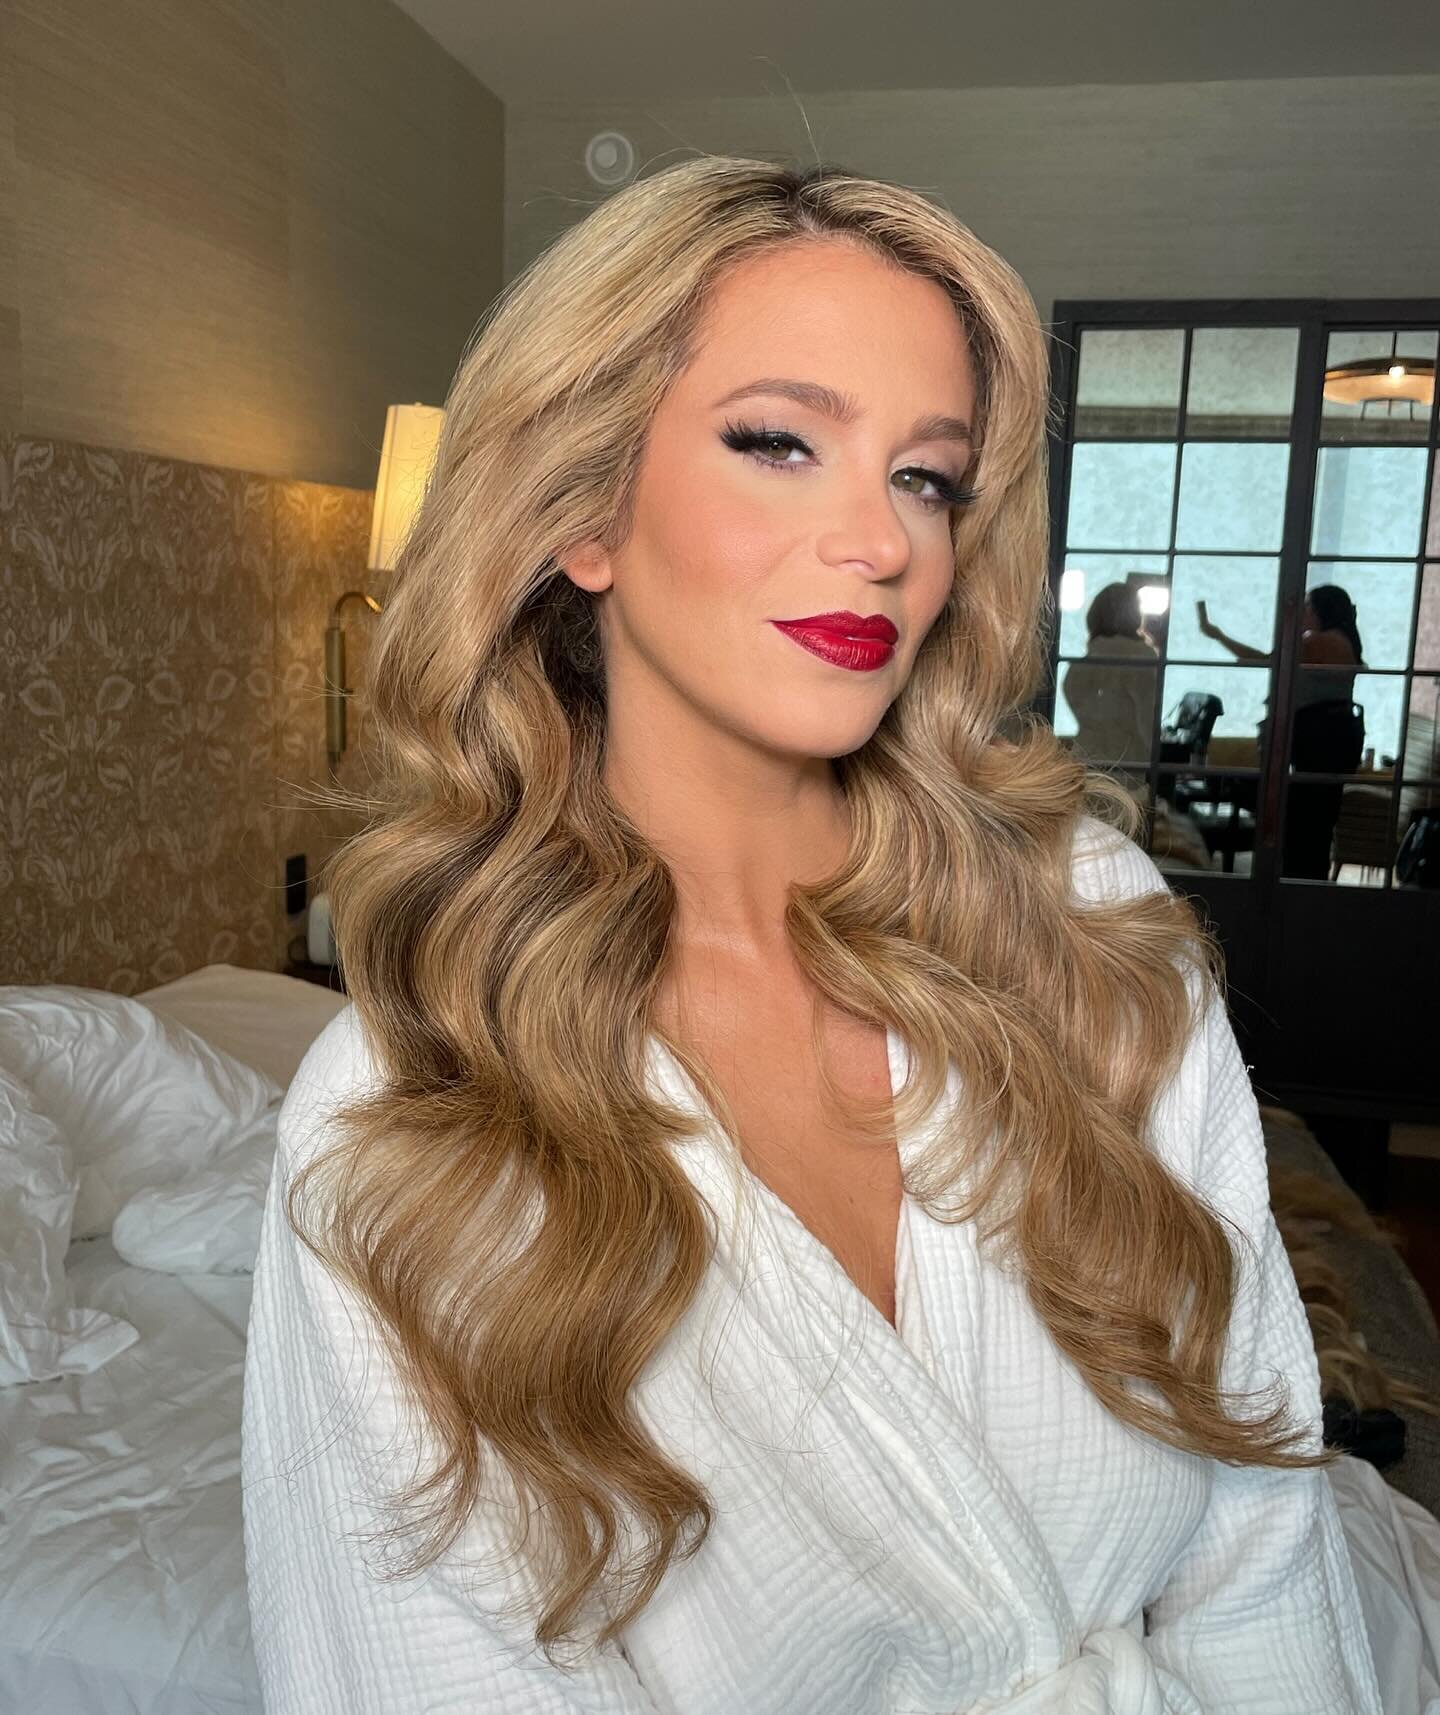 Red Lips for the Red Carpet 💋 @anacristinacash #CMTawards 

Makeup be me @dolledbyv 
Hair by @hairbyrachelgalindo 
Booked with @luxbeautyandbridal